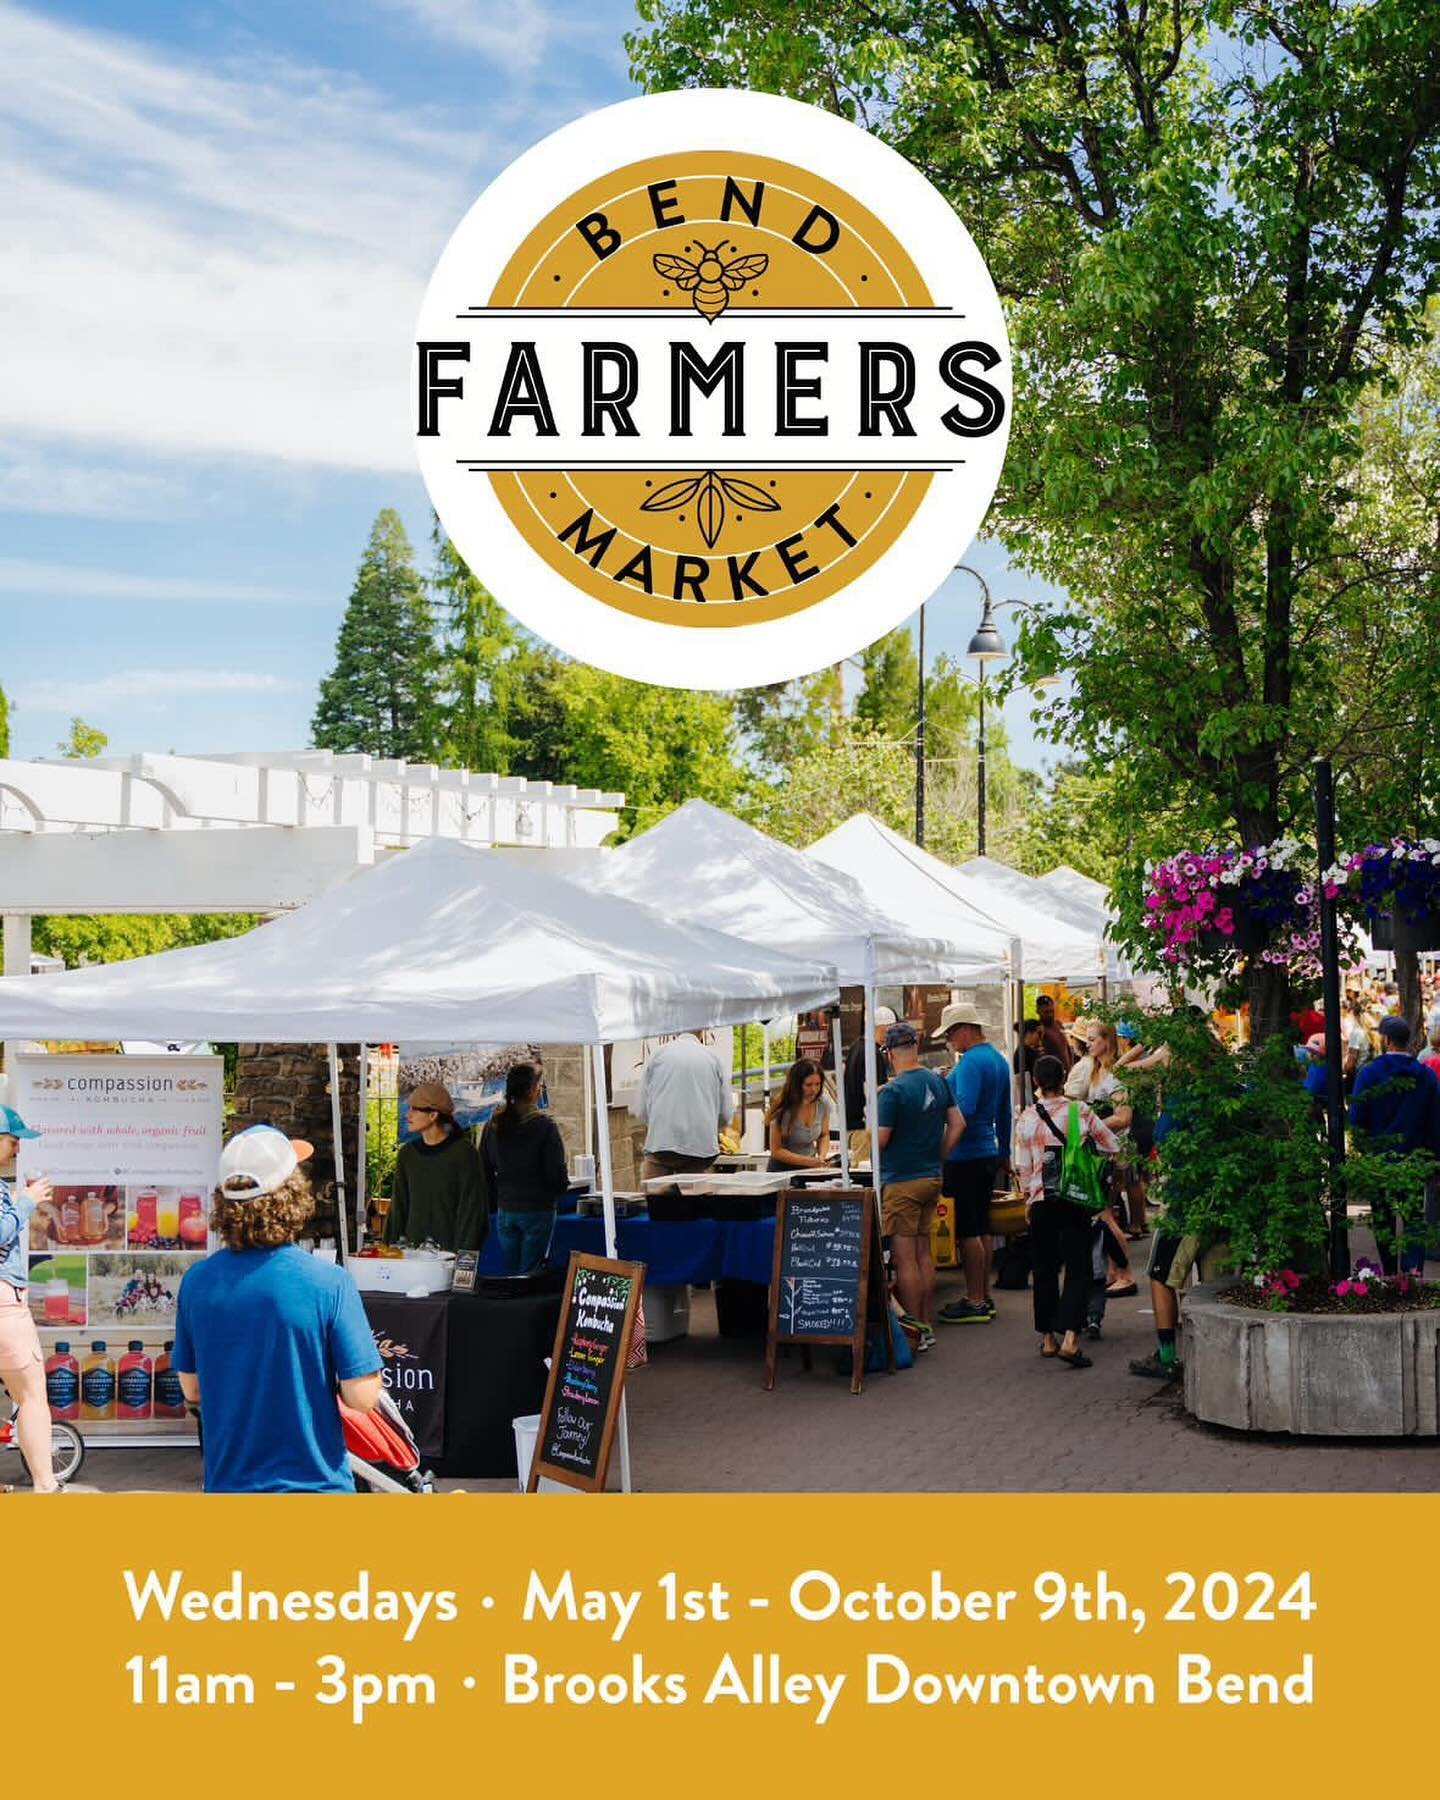 Wednesday 5/1 is the big day! Downtown Bend welcomes back @bendfarmersmarket from 11-3 in Brooks Alley. 

Don&rsquo;t let the weather the past few days fool you - Spring is here 🙌🏻